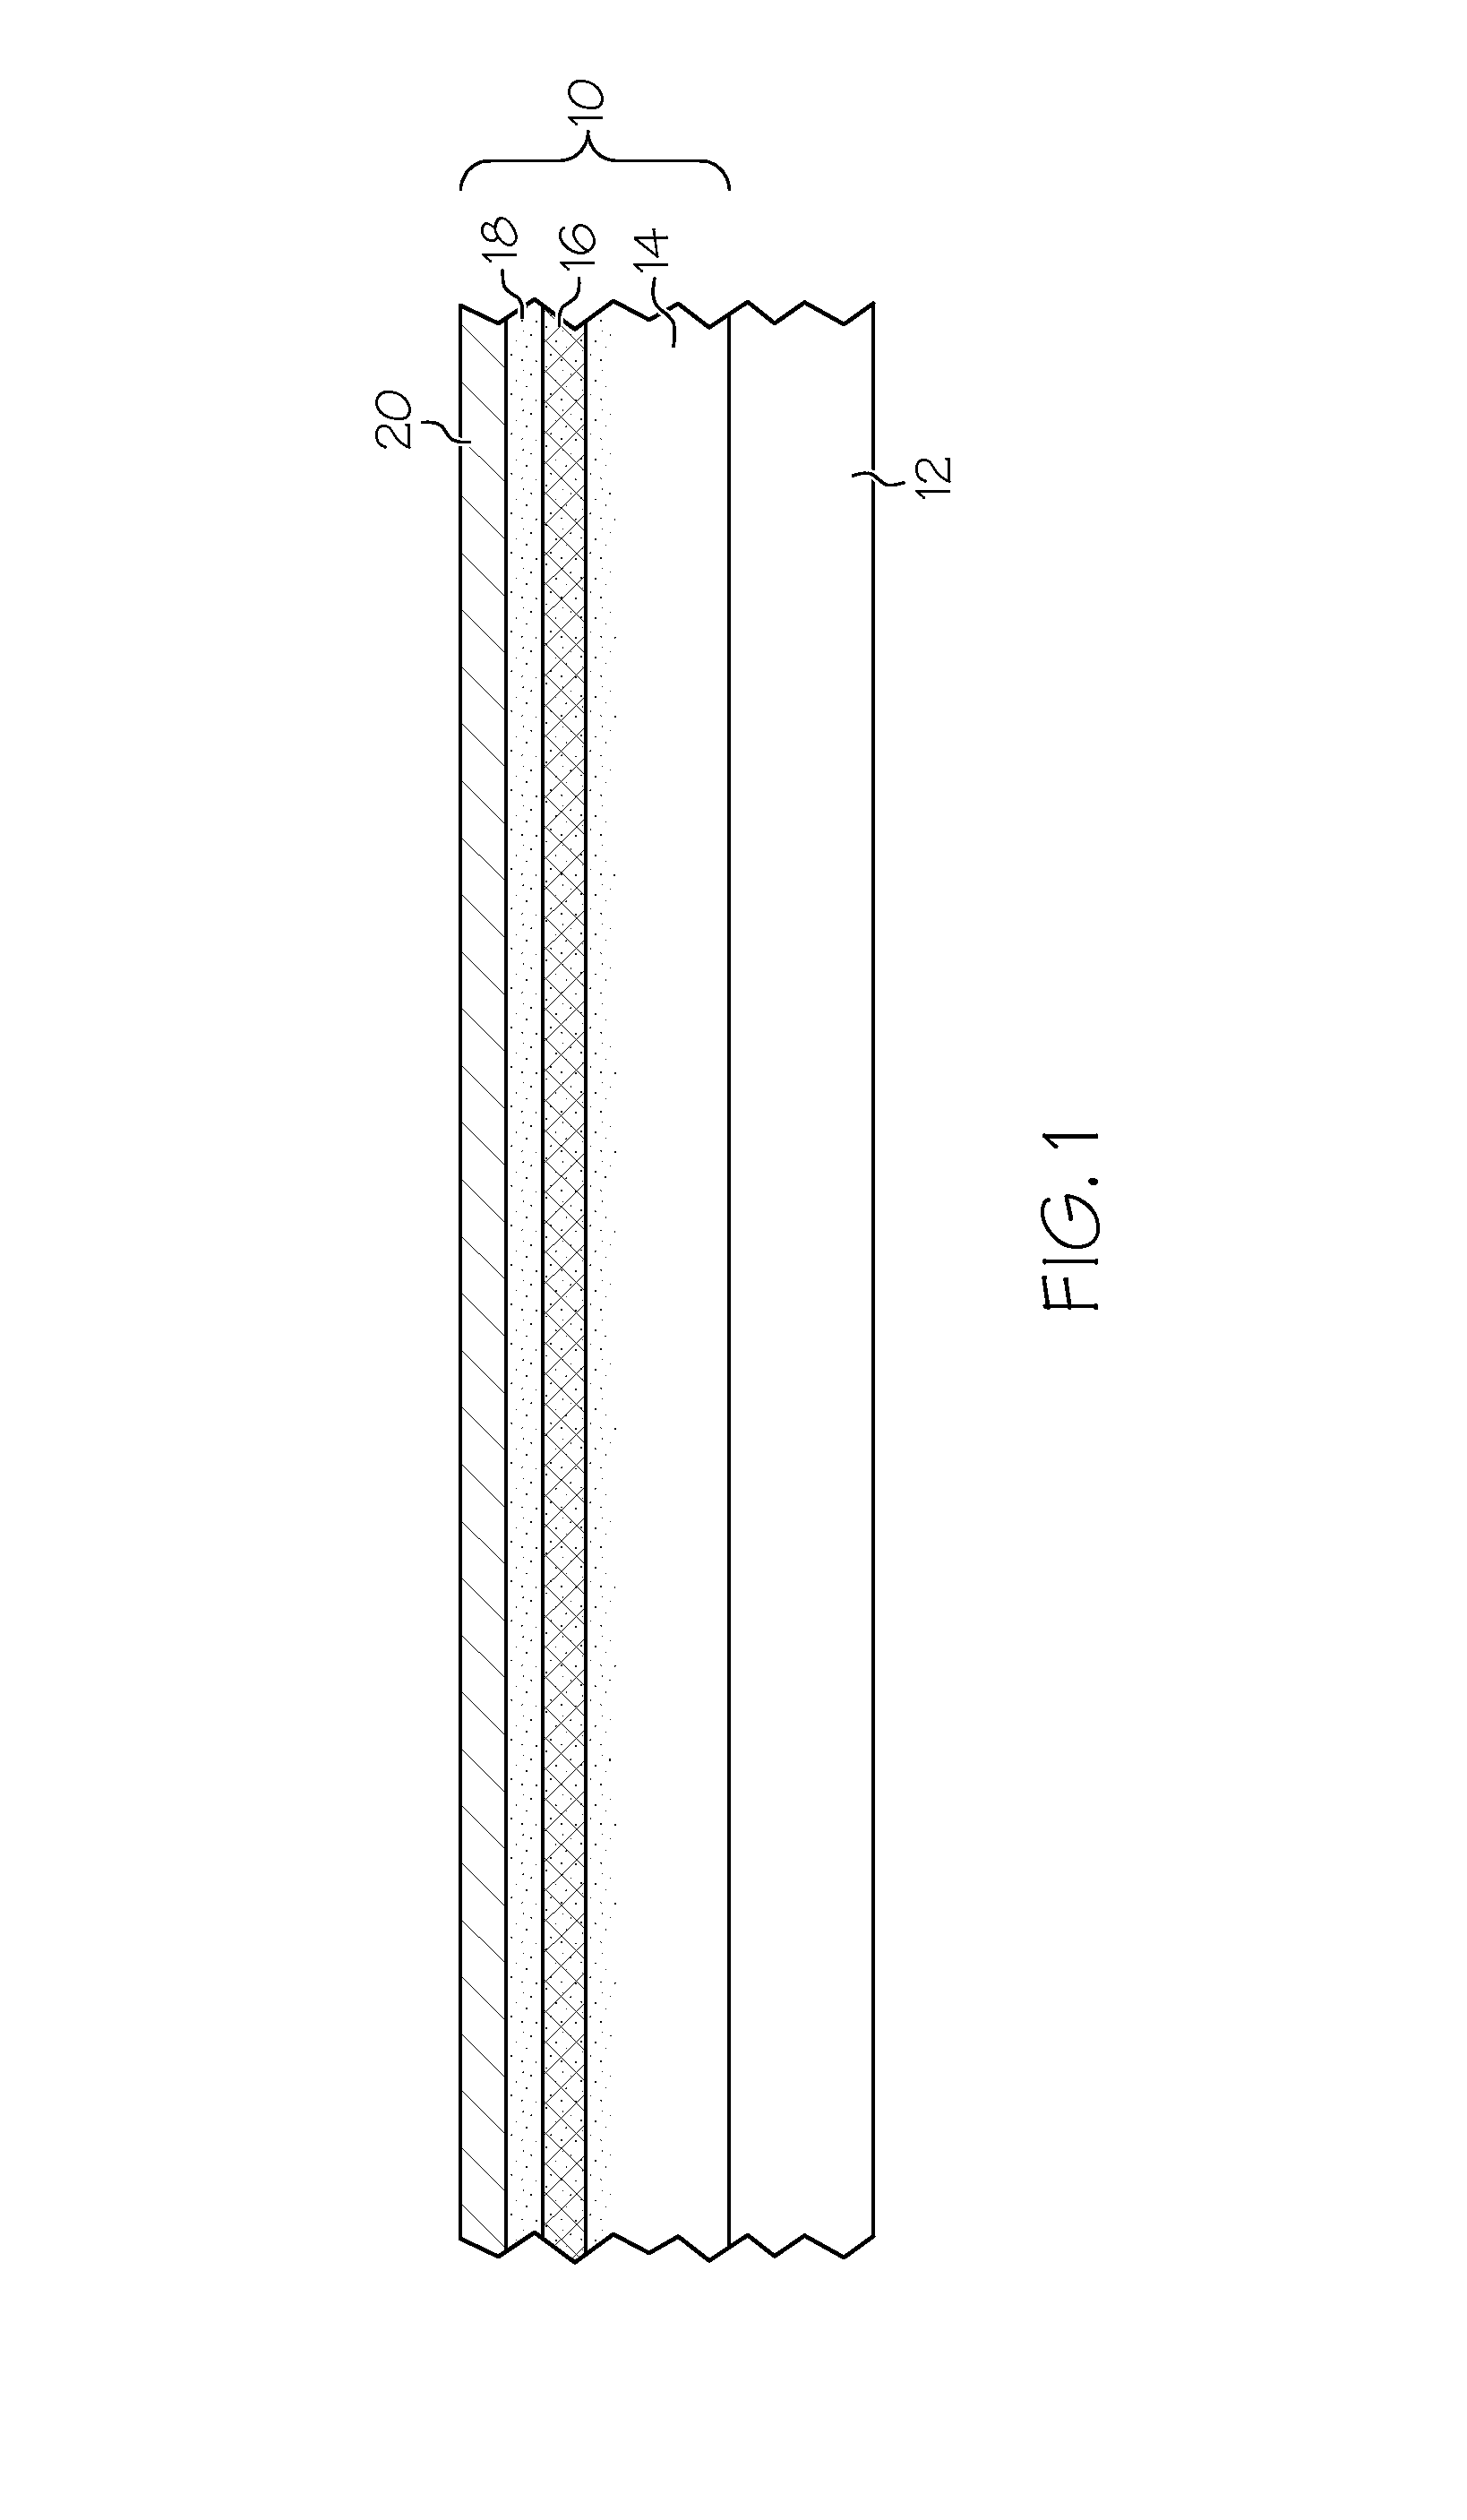 Method of forming composite roofing overlay containing paint waste